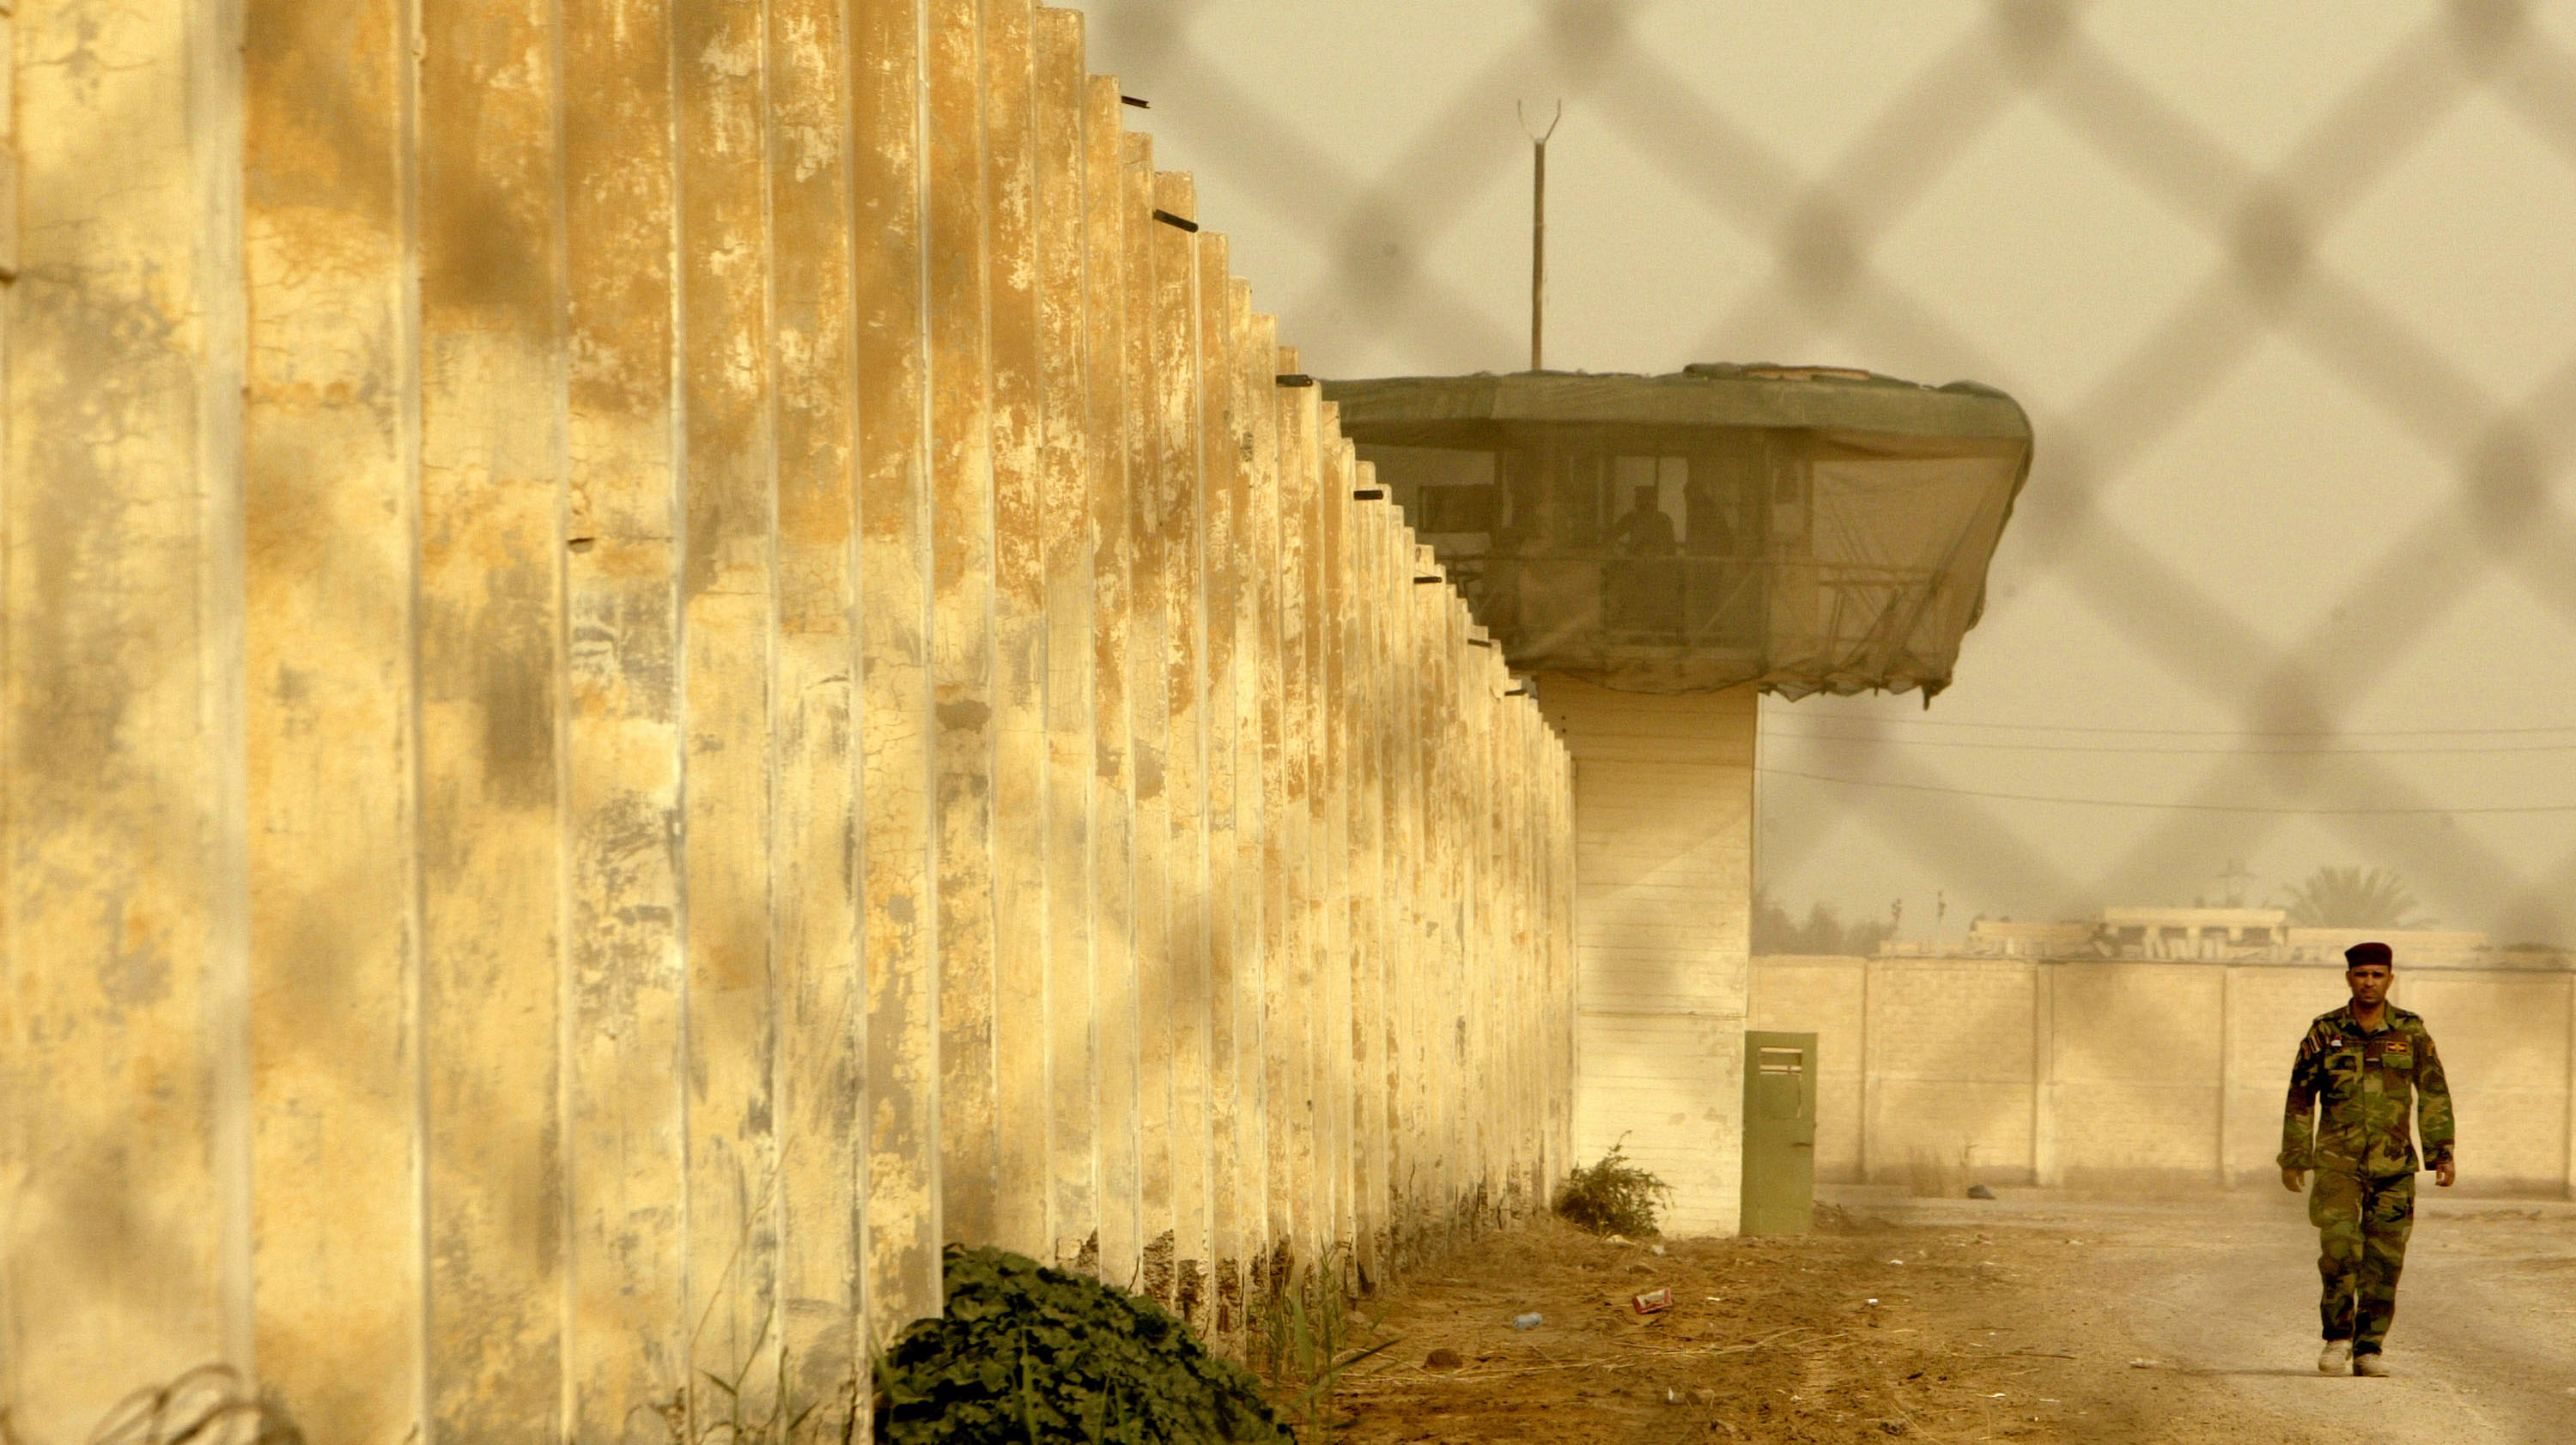 An Iraqi security officer patrols the grounds at the newly opened Baghdad Central Prison in Abu Ghraib on February 21, 2009 in Baghdad.